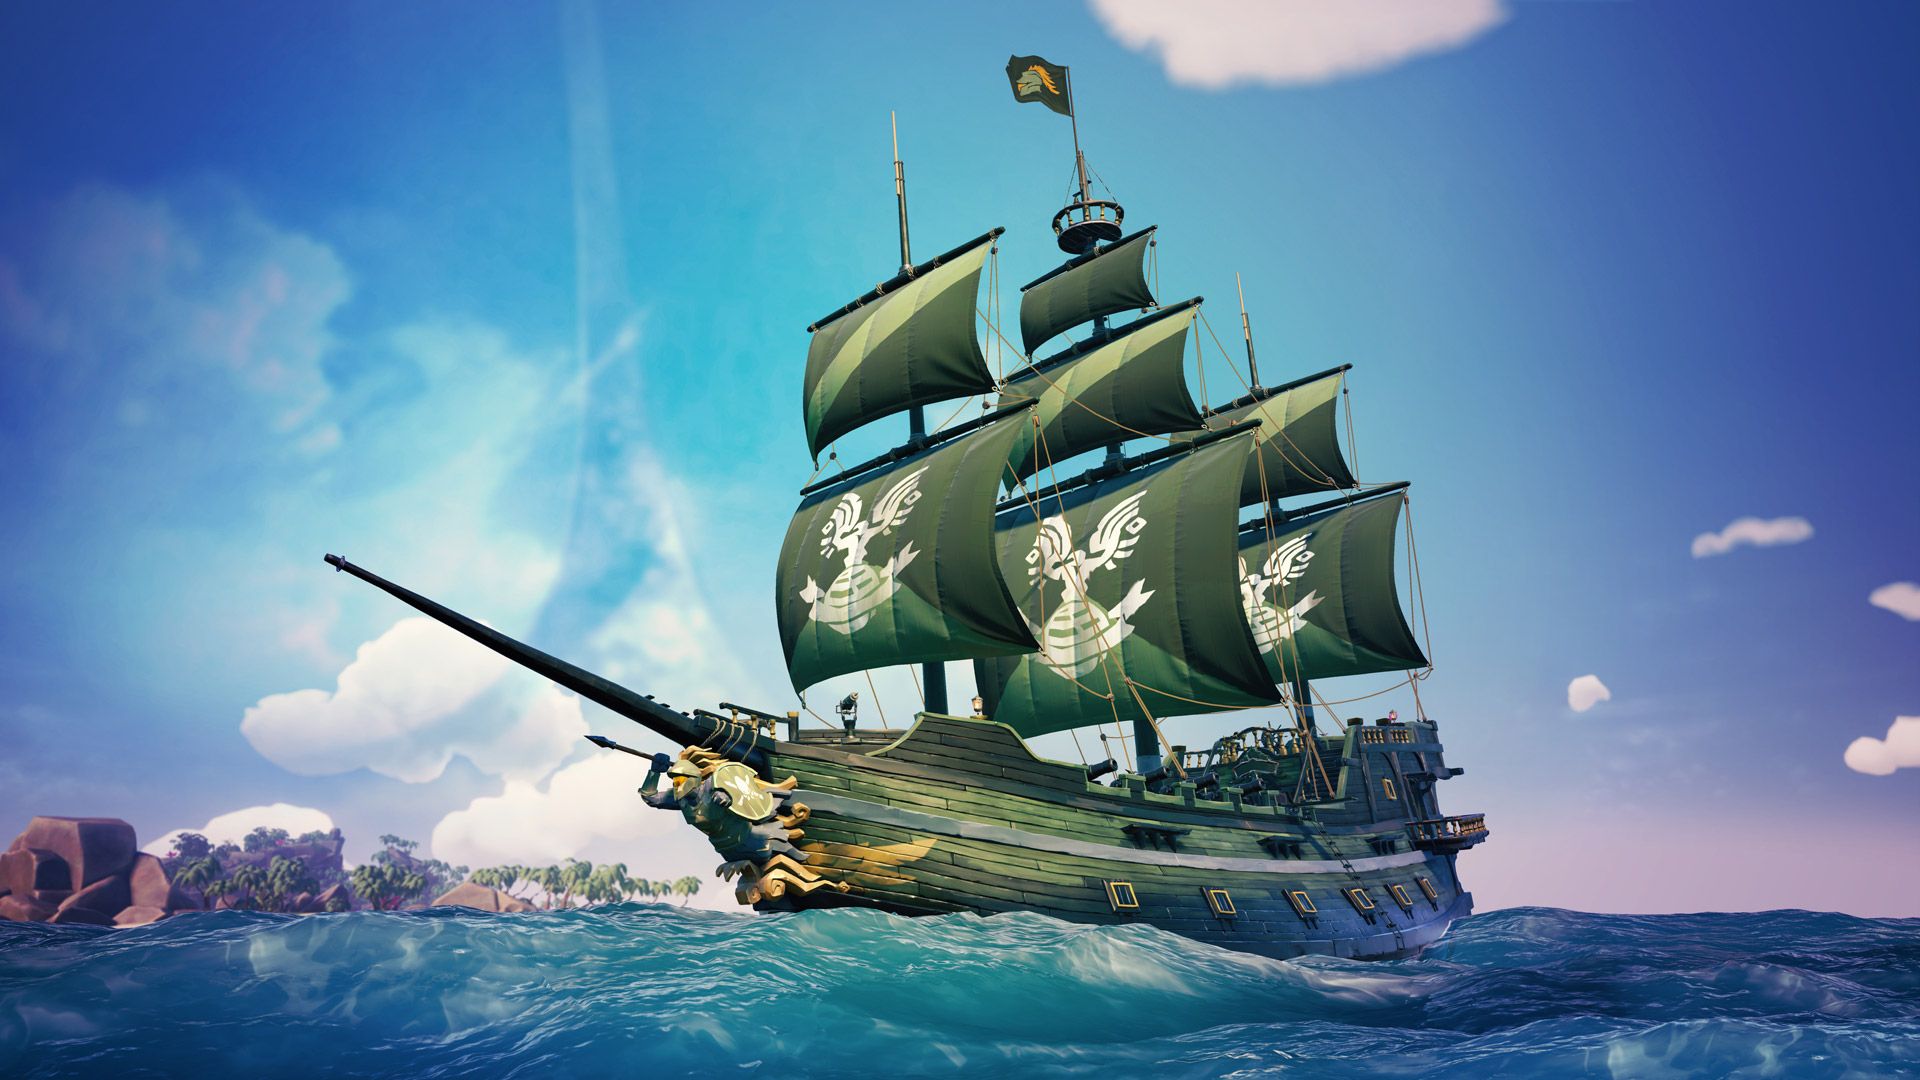 Free Sea of Thieves Wallpaper in 1920x1080